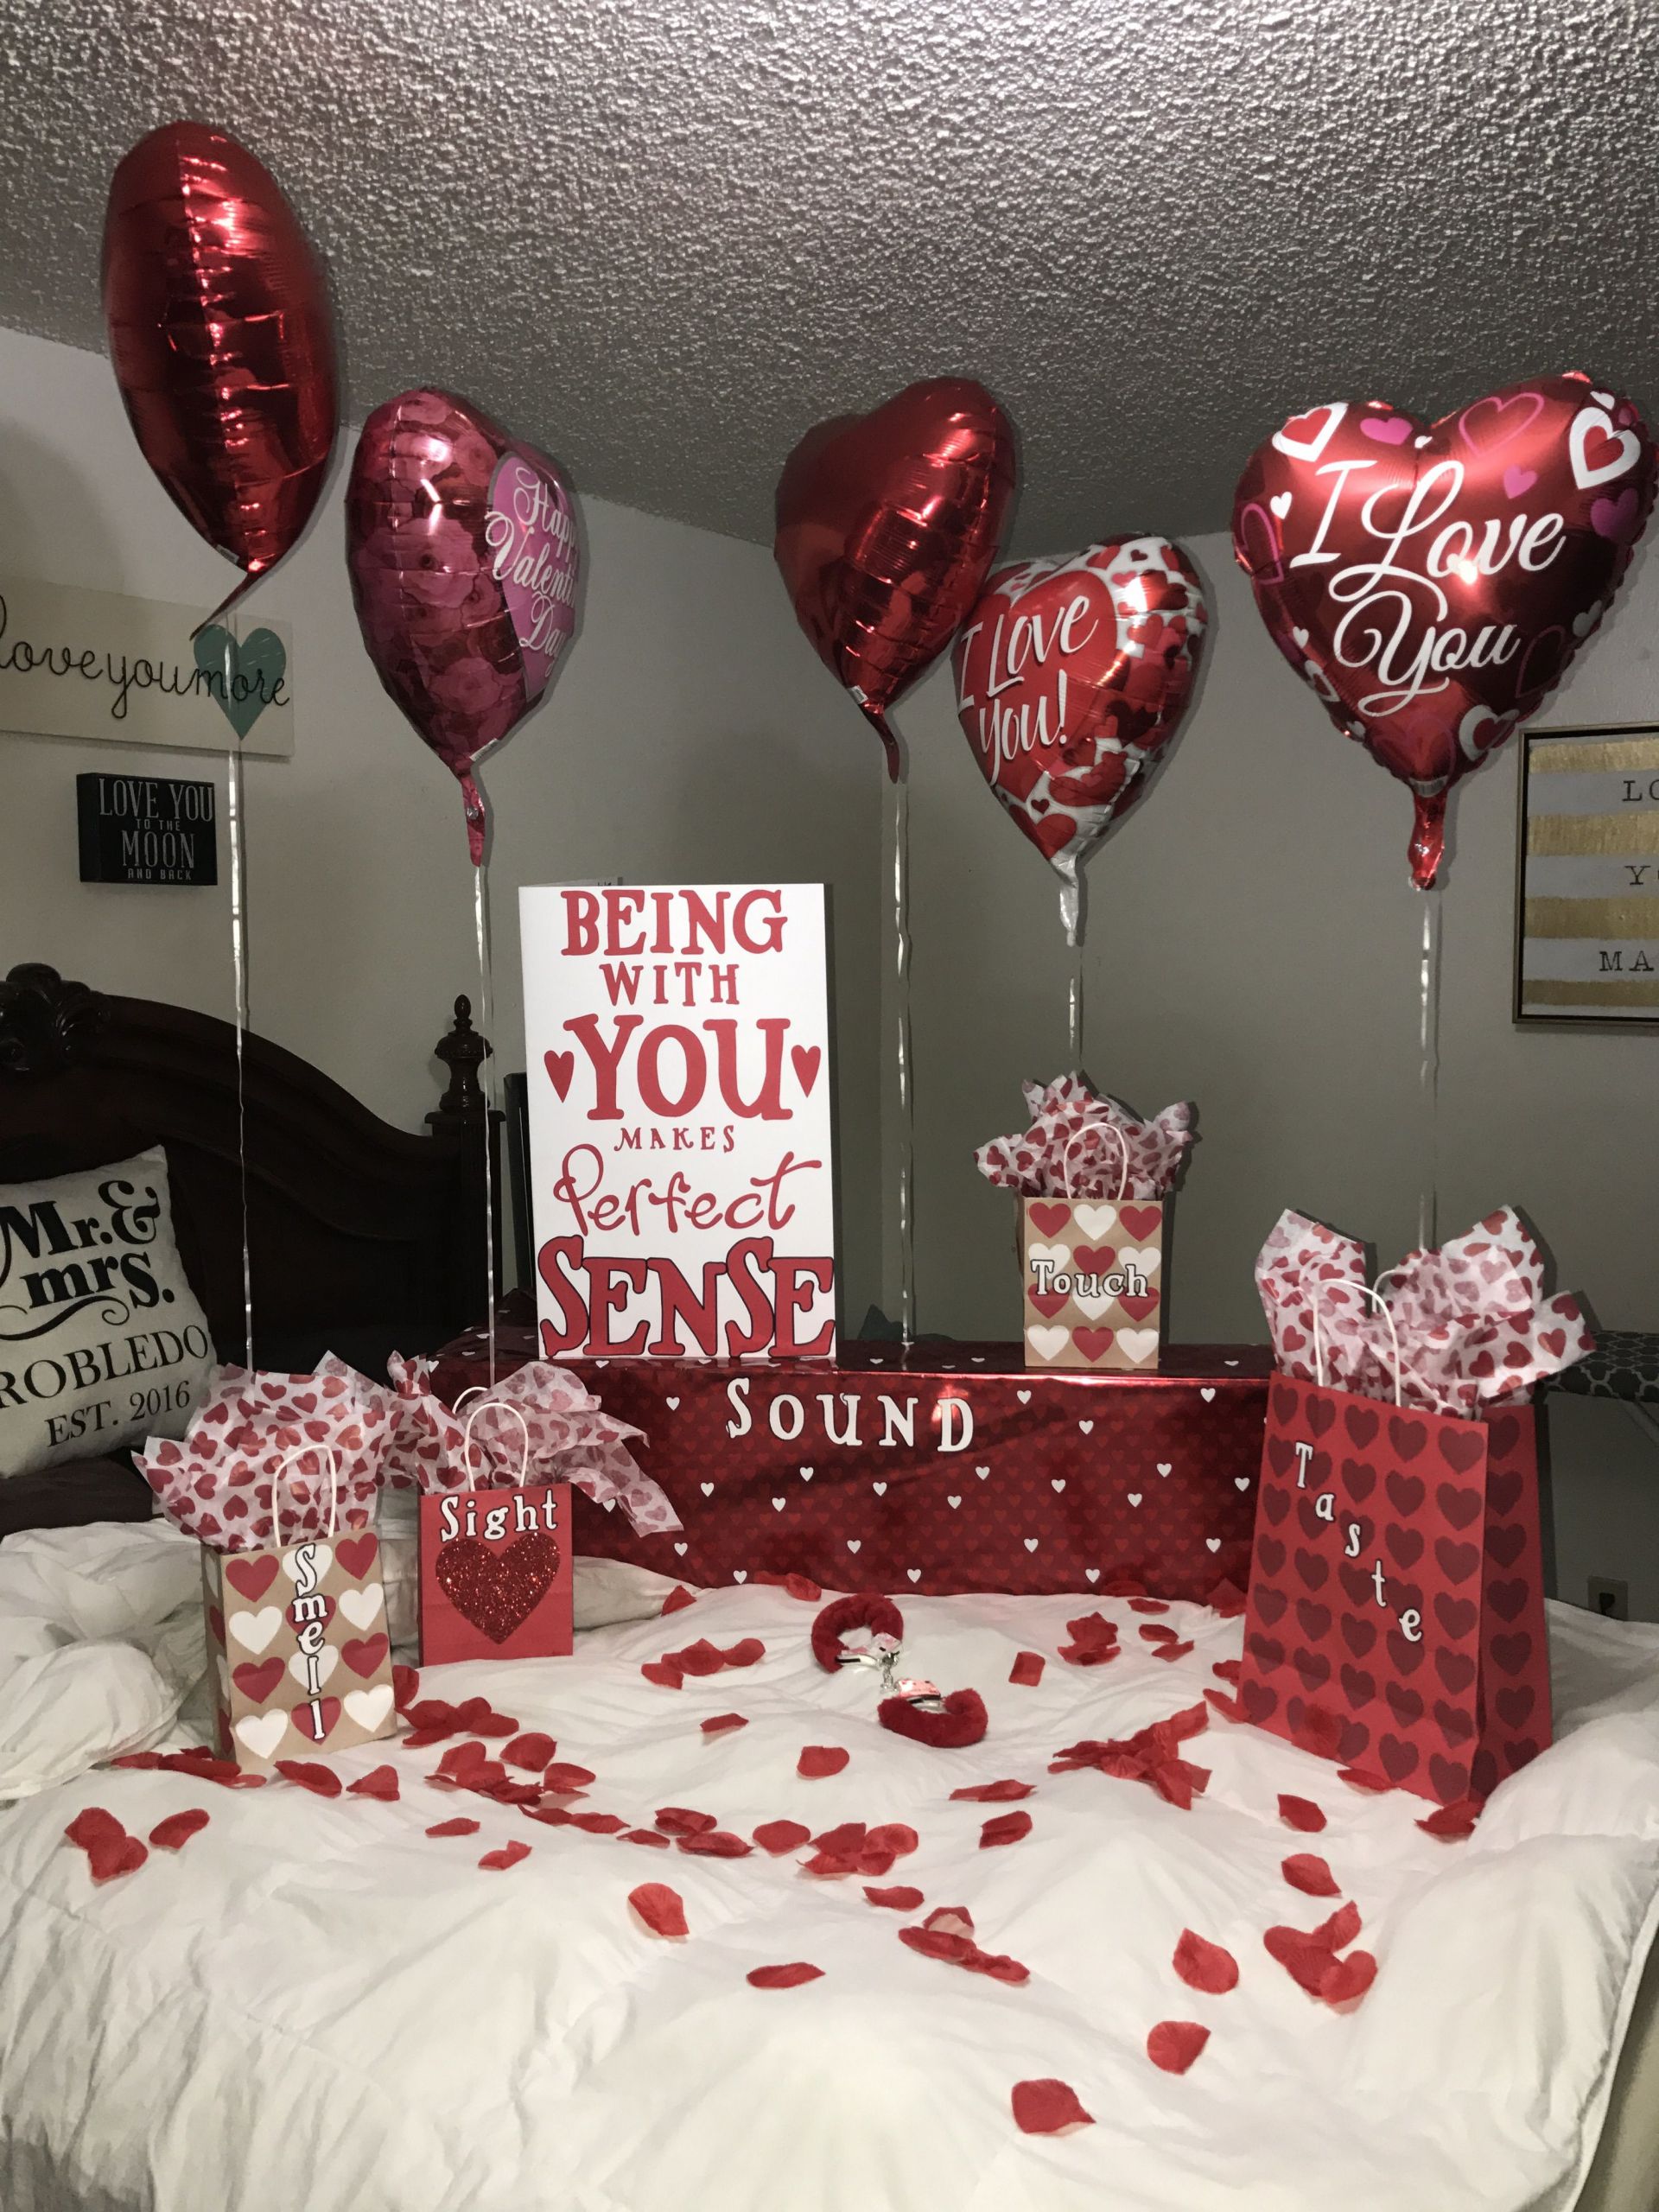 Cute Ideas For Valentines Day For Her
 Valentine s Day surprise for him 5 Senses